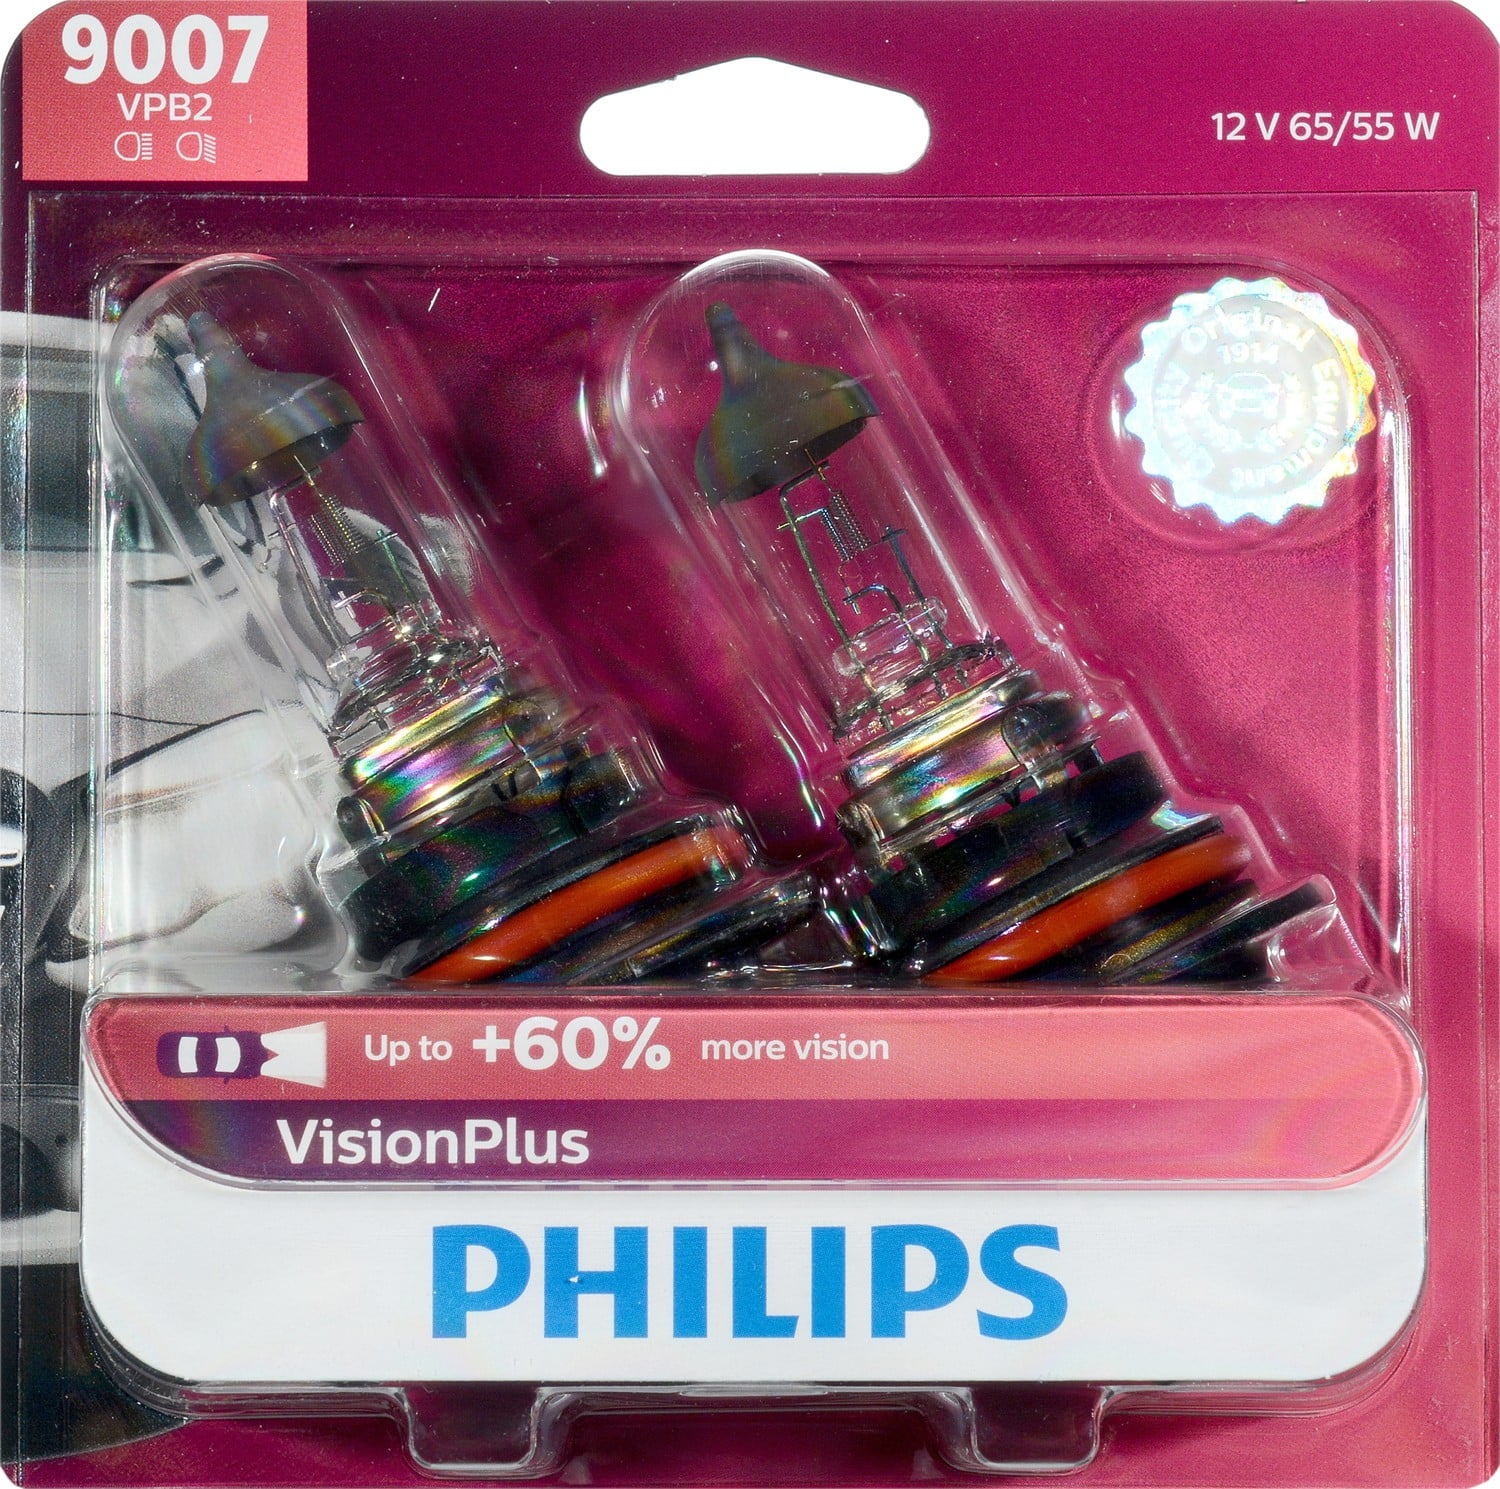  Philips H1 VisionPlus Upgrade Headlight Bulb with up